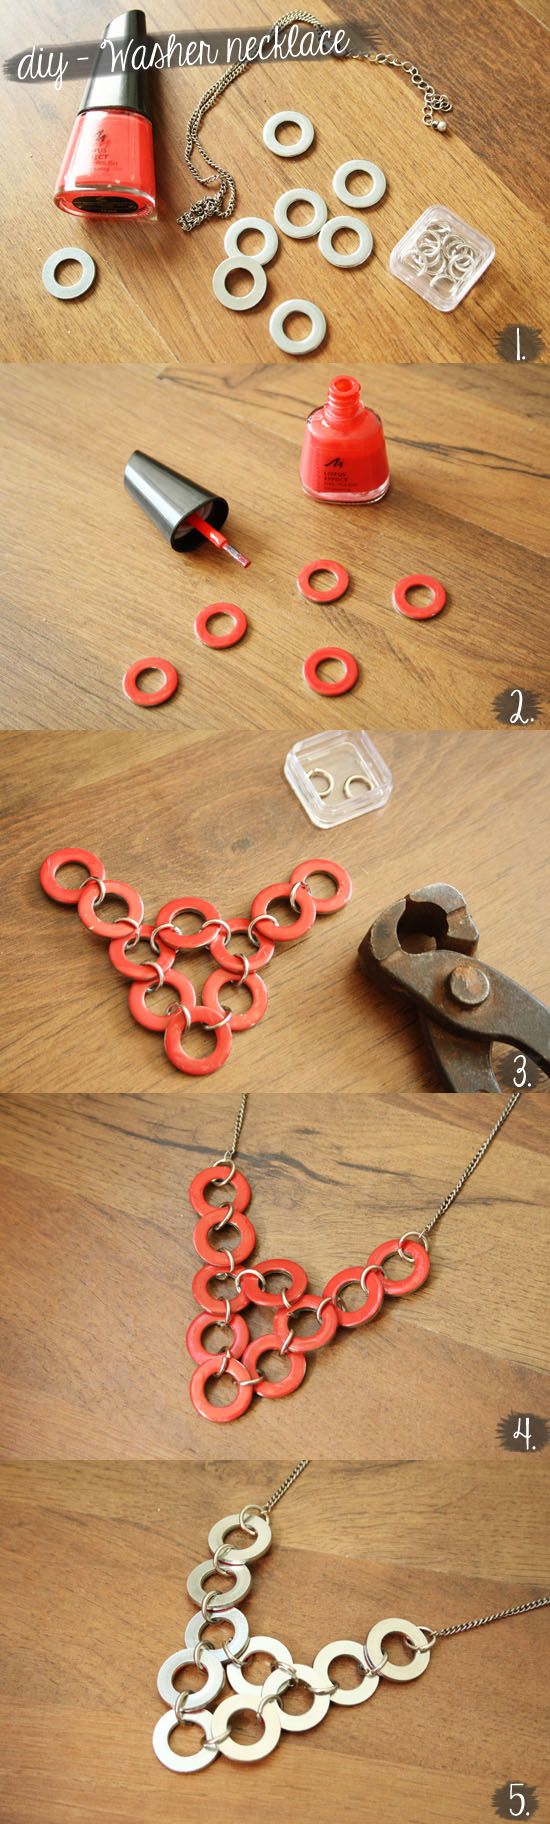 DIY – Washer necklace